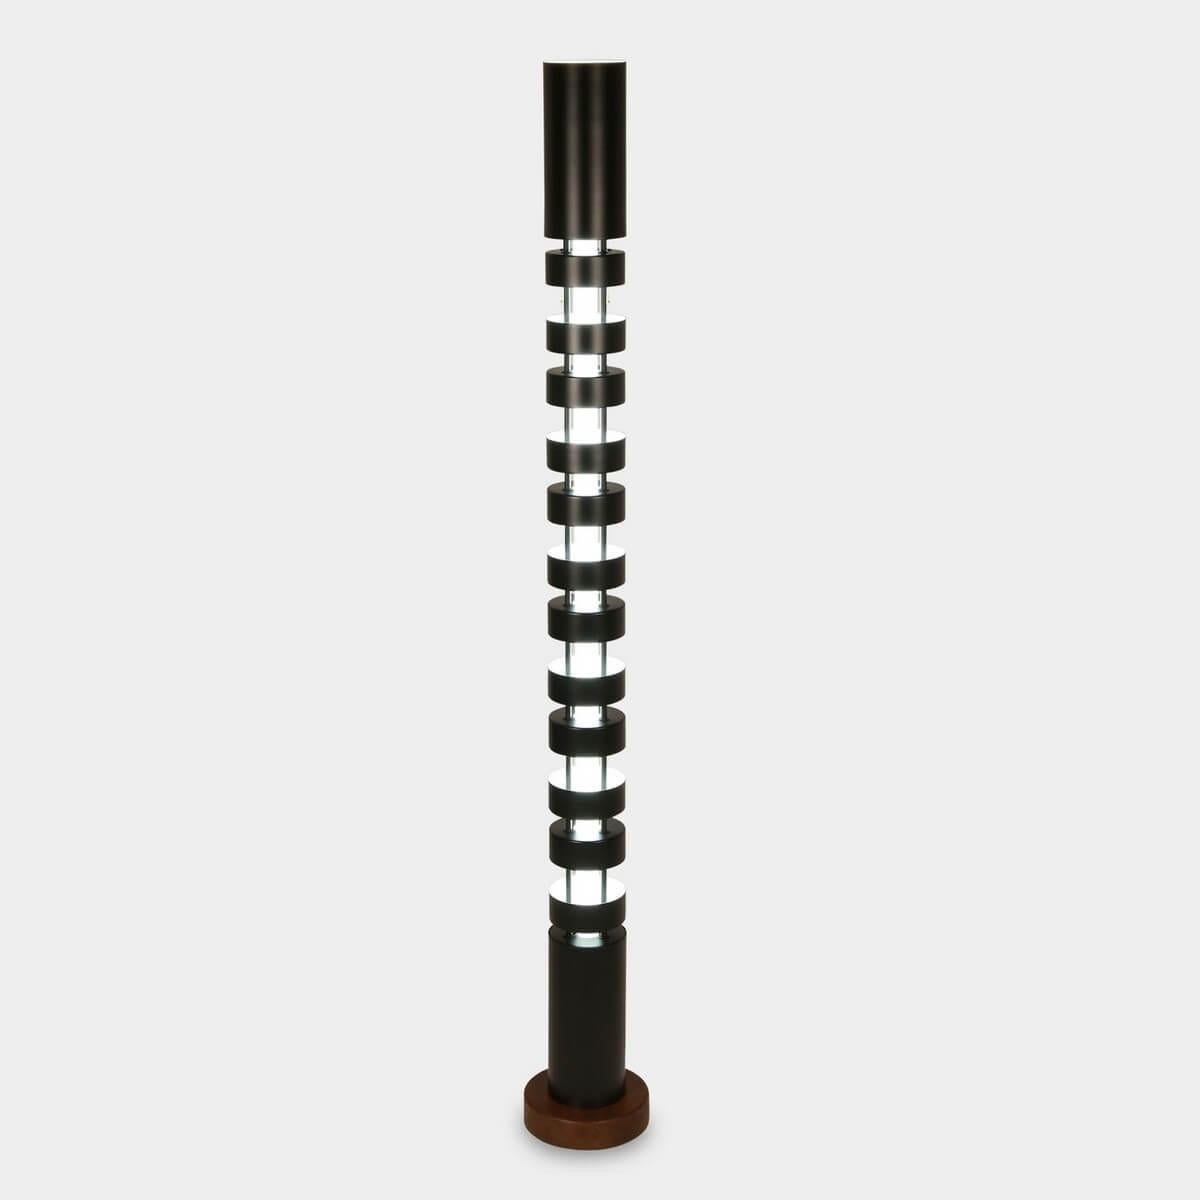 Floor lamp model 'Large TOTEM Column Lamp' designed by Serge Mouille in 1962.

Manufactured by Editions Serge Mouille in France. The production of lamps, wall lights and floor lamps are manufactured using craftsman’s techniques with the same